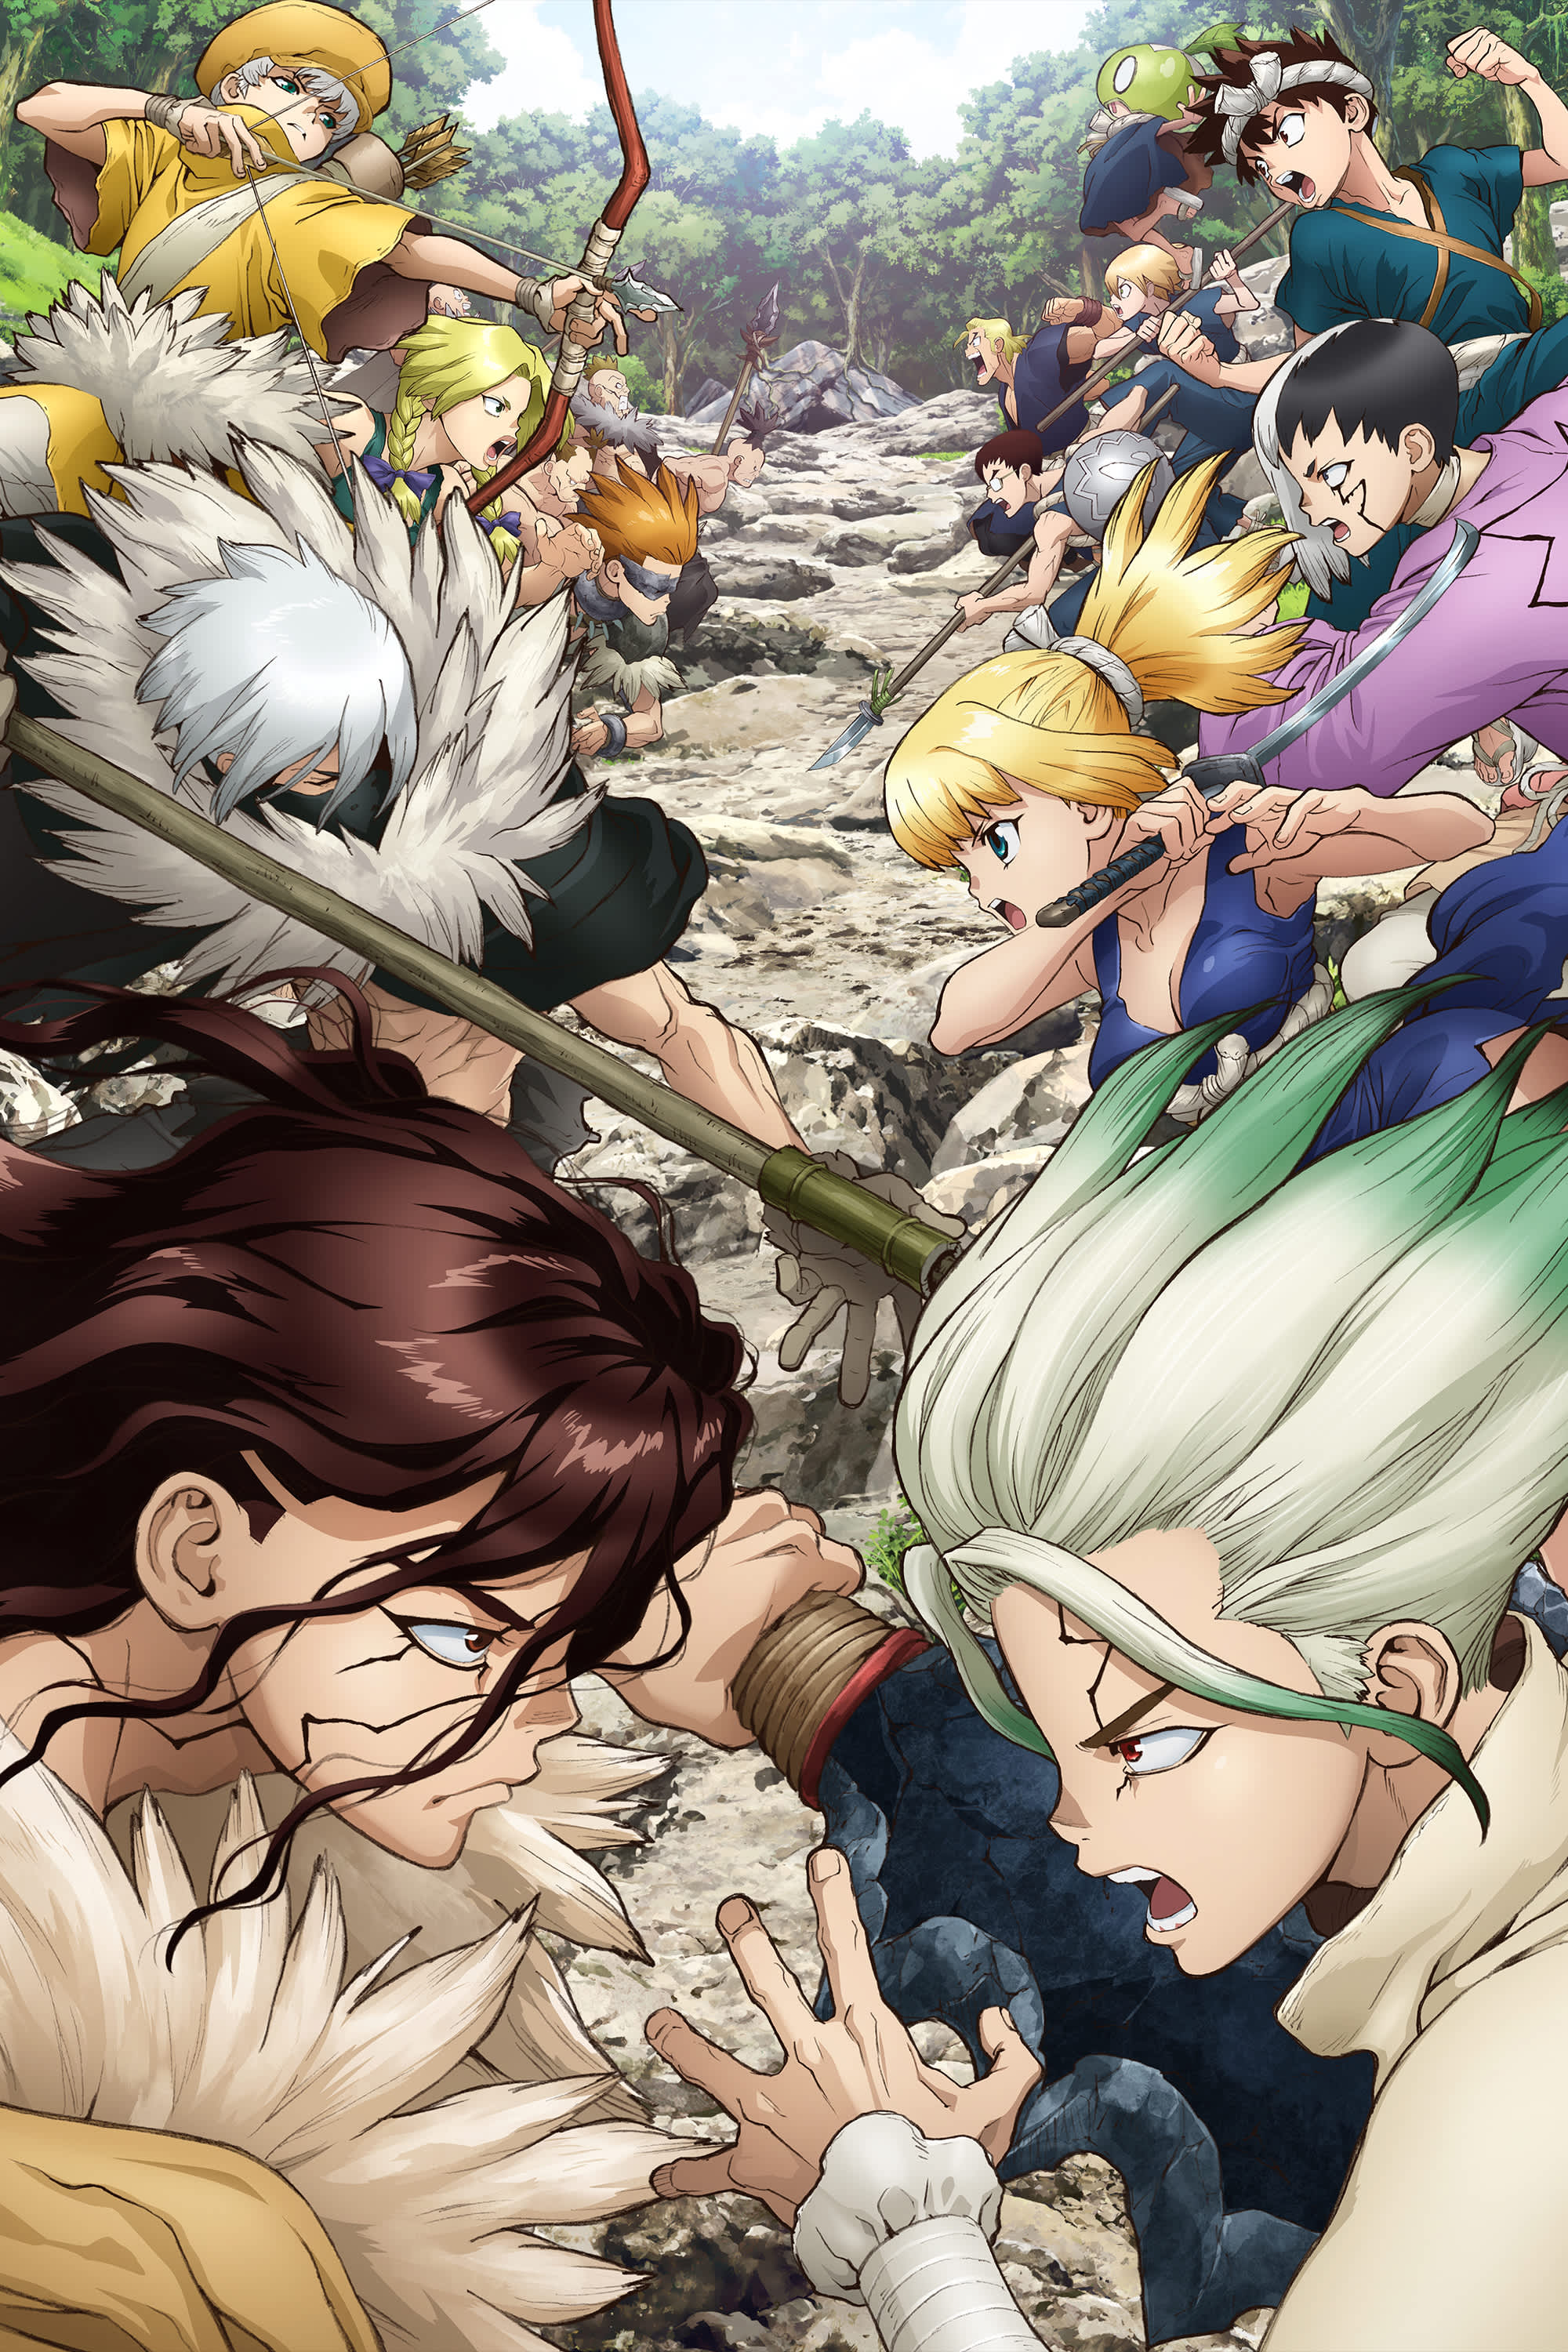 Dr. STONE | Watch on Funimation